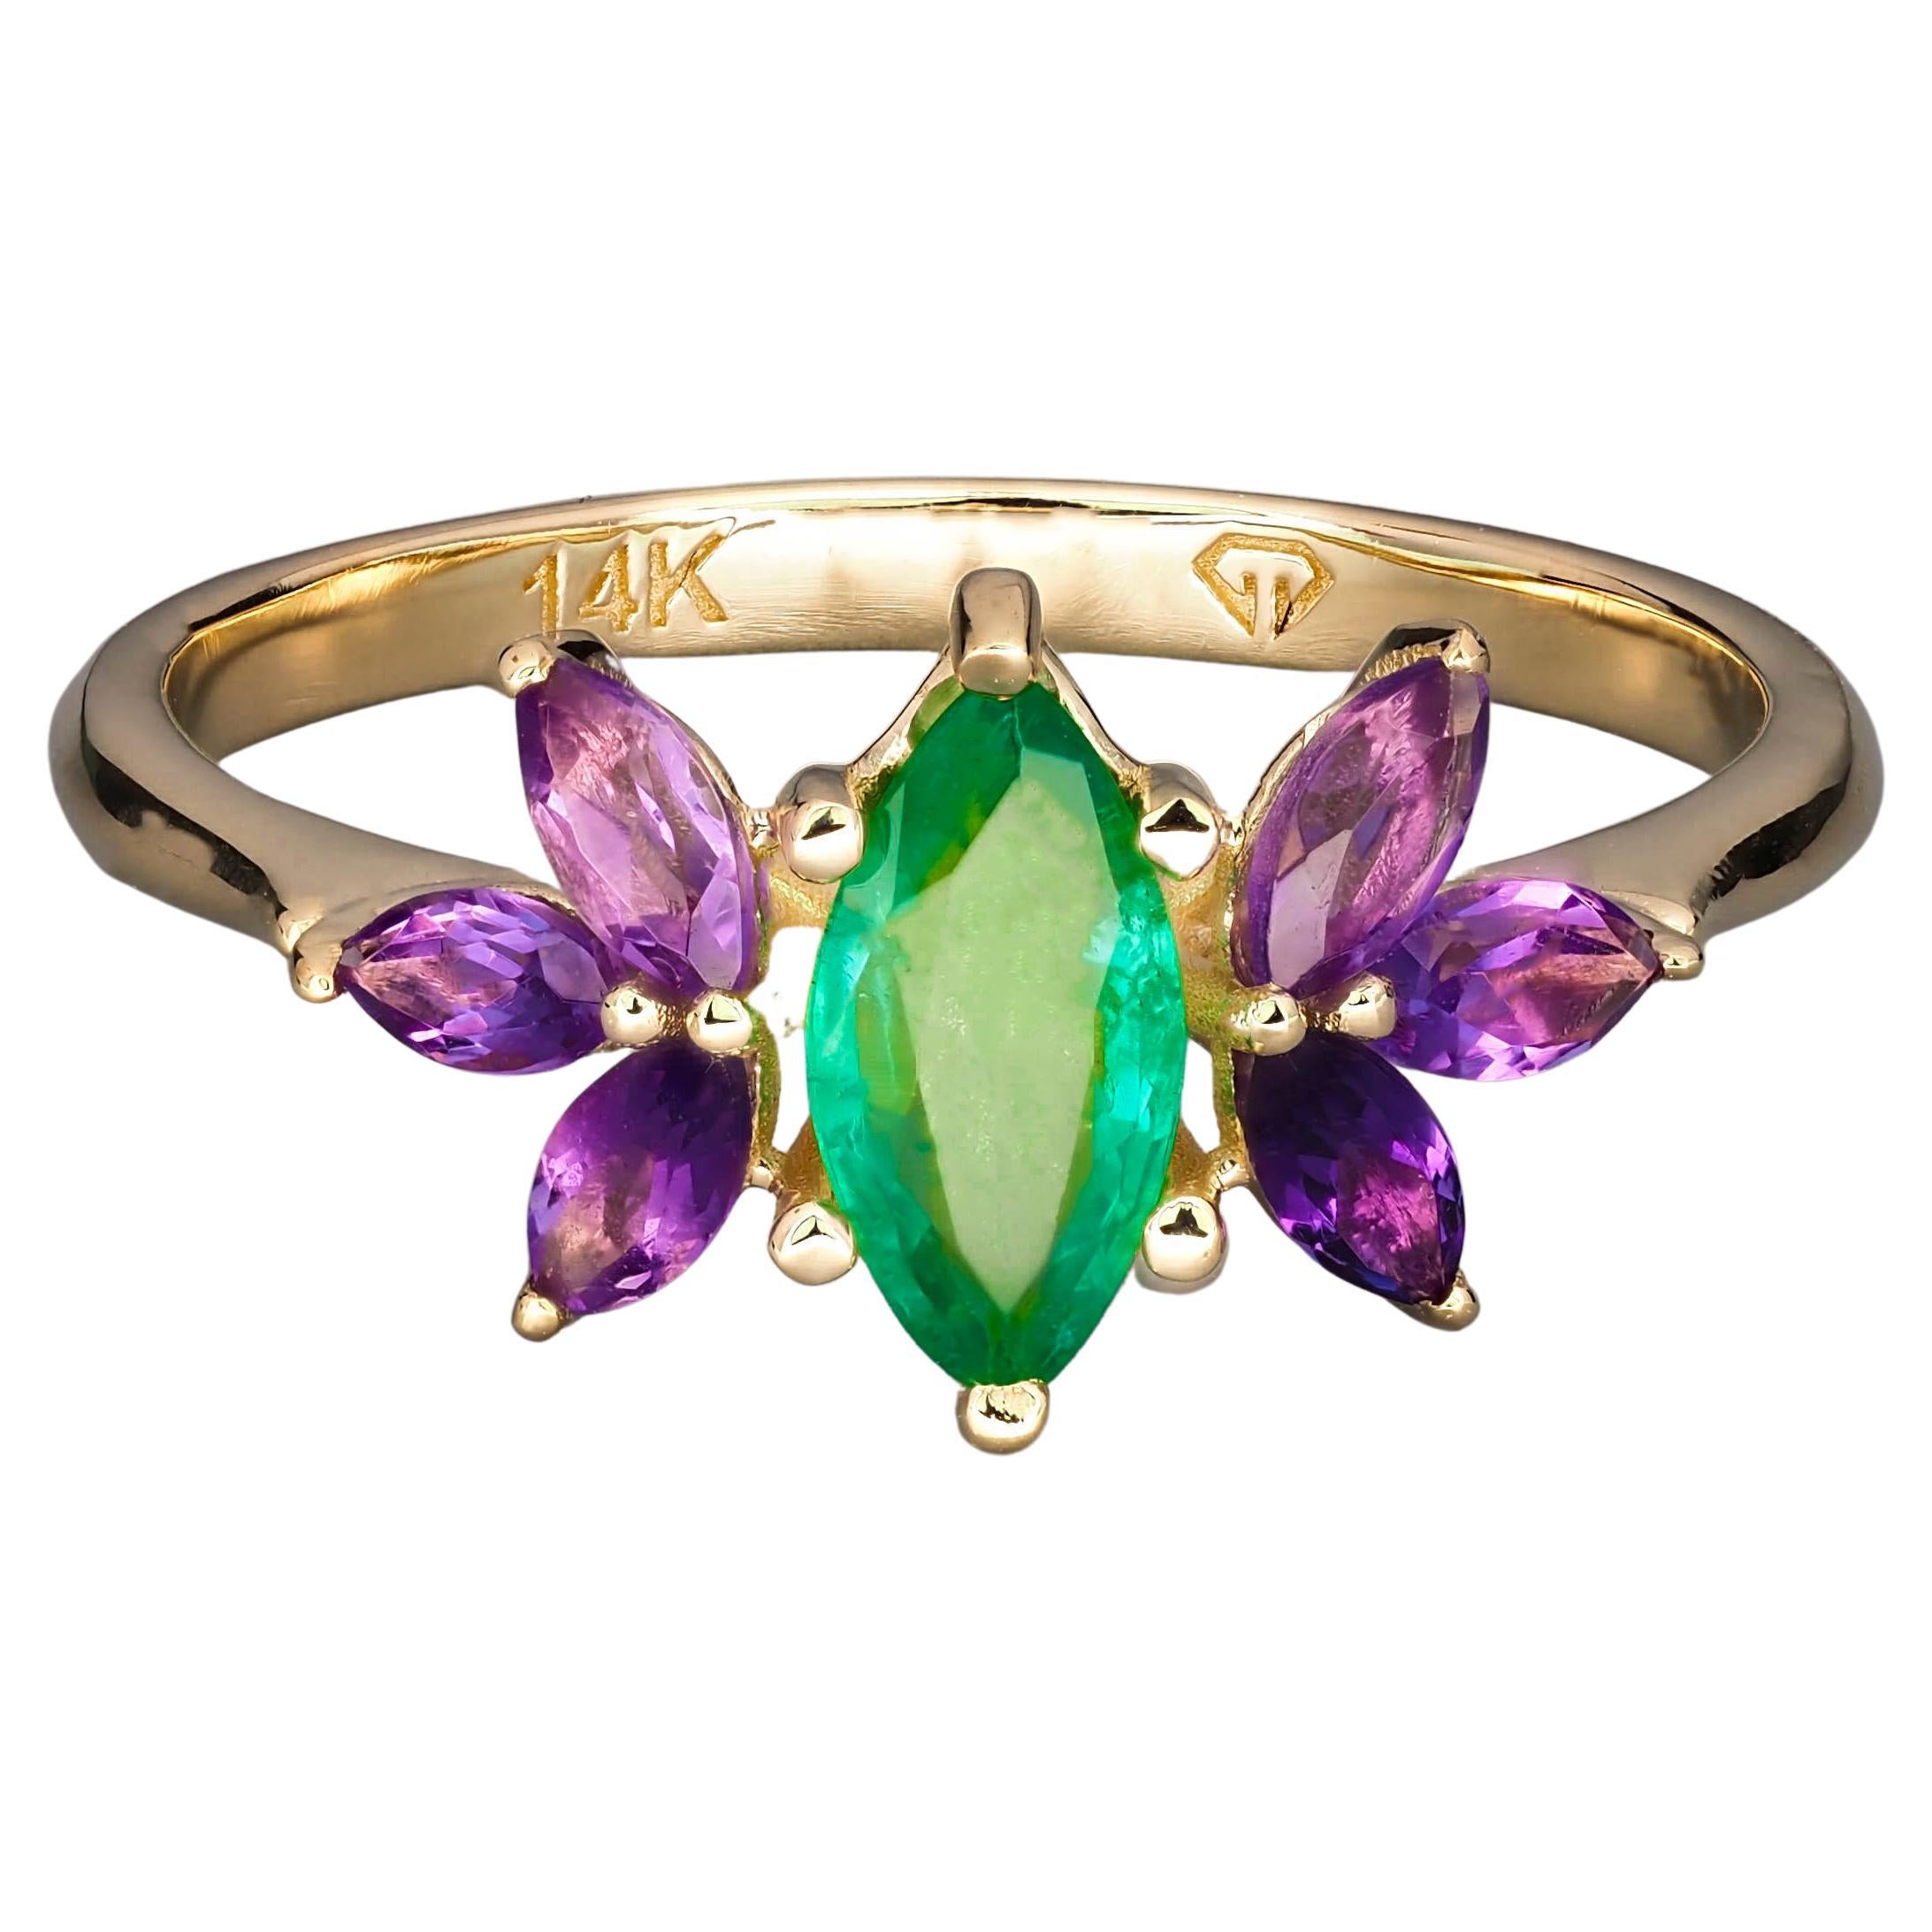 For Sale:  Emerald gold ring. 14k Gold Ring with Marquise Emerald and Amethysts.